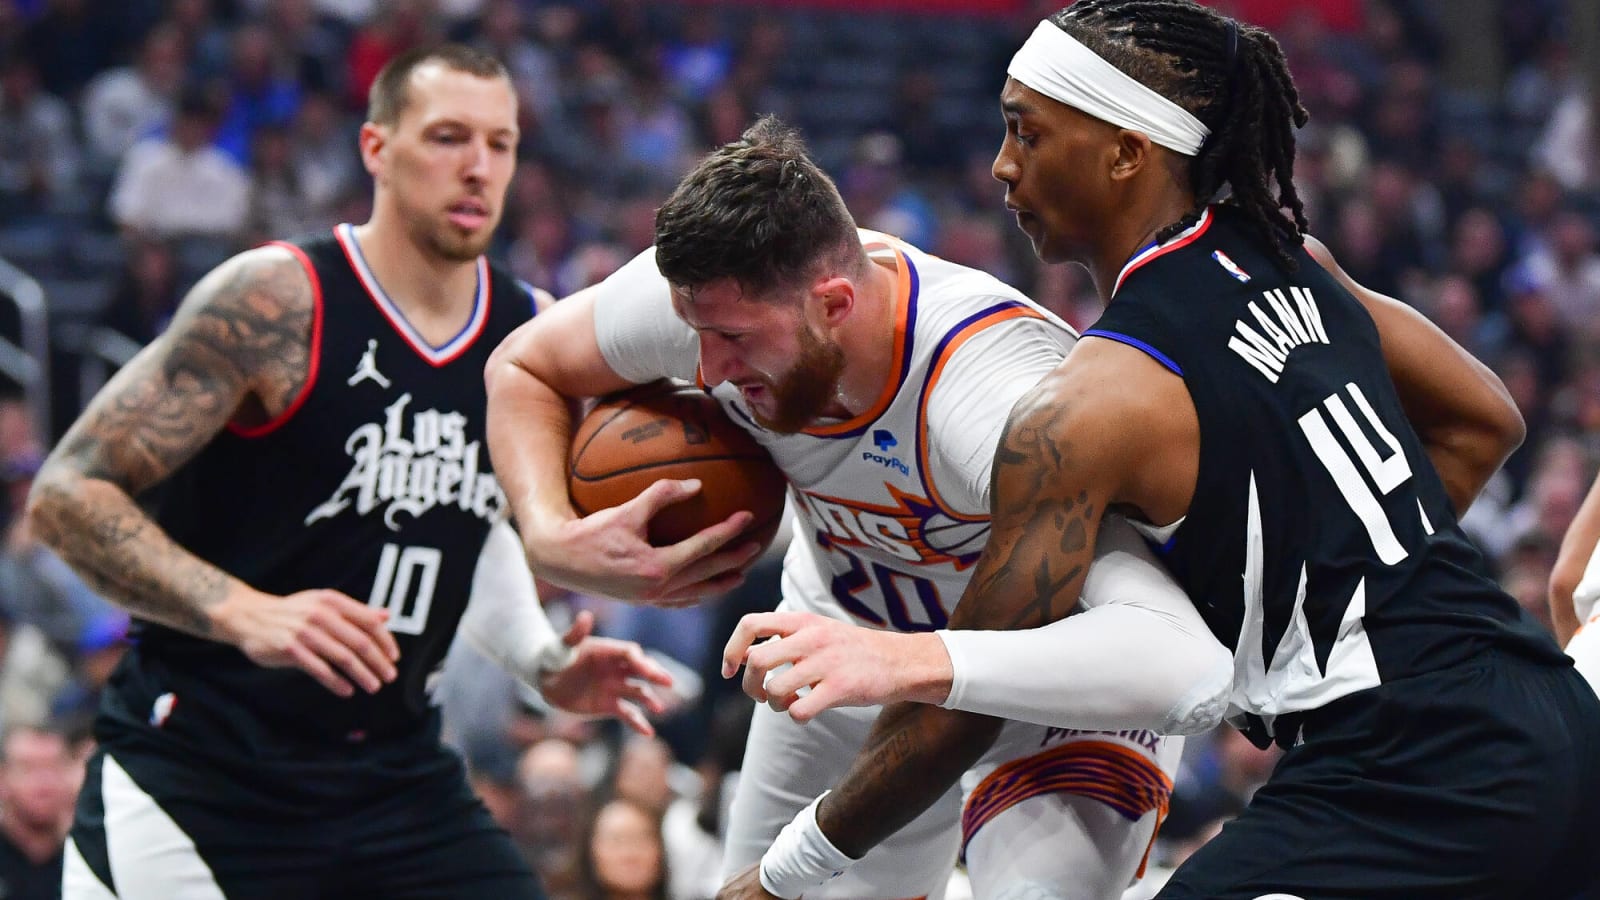 Phoenix Suns’ Jusuf Nurkic Goes Full Dennis Rodman In Win vs Clippers (Minus Crazy Hairstyle)